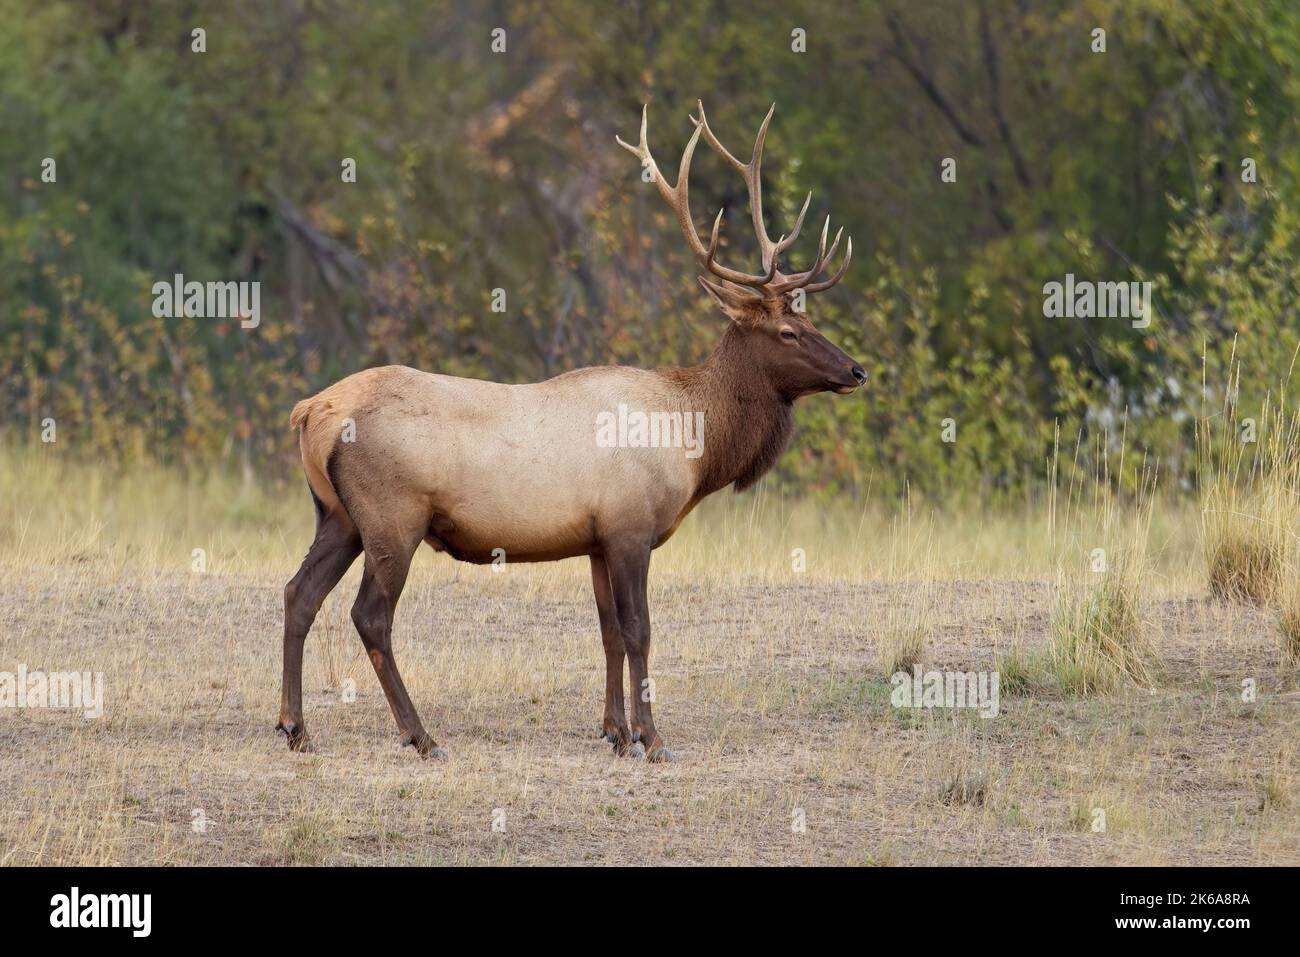 A big bull elk in an open area of a forest in western Montana. Stock Photo